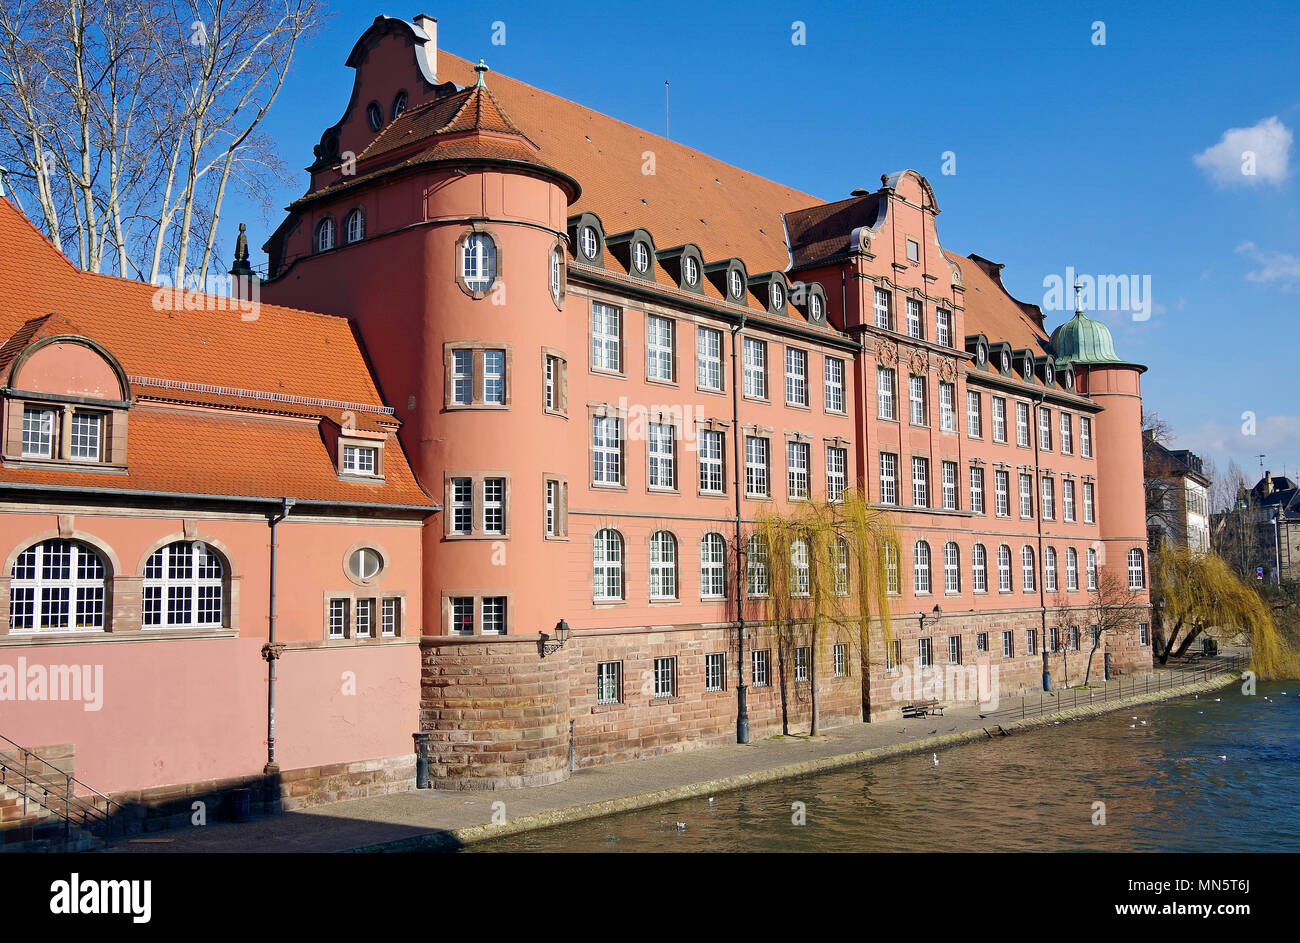 St Thomas’s school, Ecole St Thomas, in Strasbourg, viewed from the Pont St-Martin, facing the river Ill Stock Photo